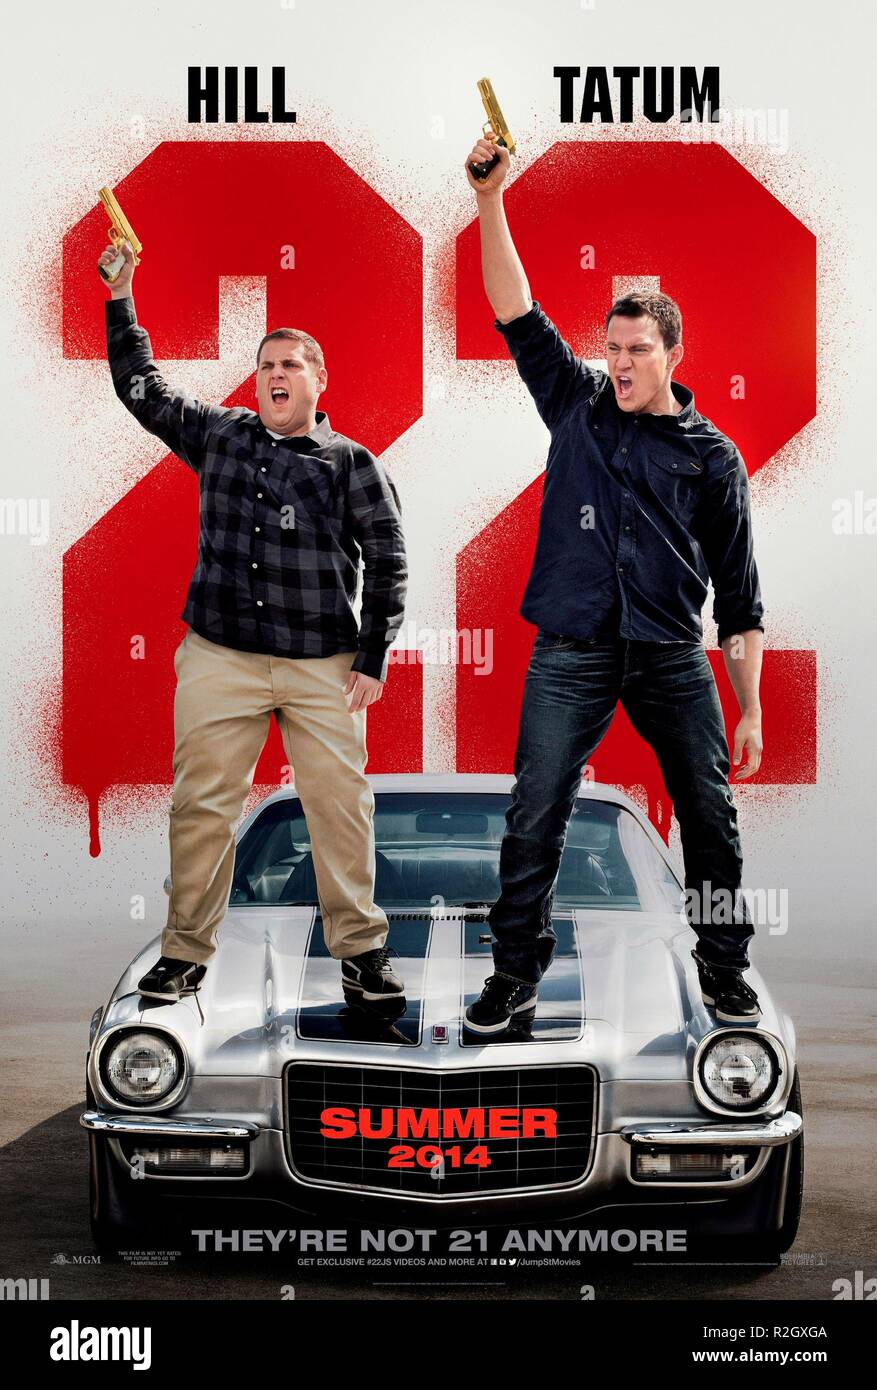 22 Jump Street Year : 2014 USA Director : Phil Lord, Christopher Miller Jonah Hill, Channing Tatum  Movie poster (USA) Stock Photo